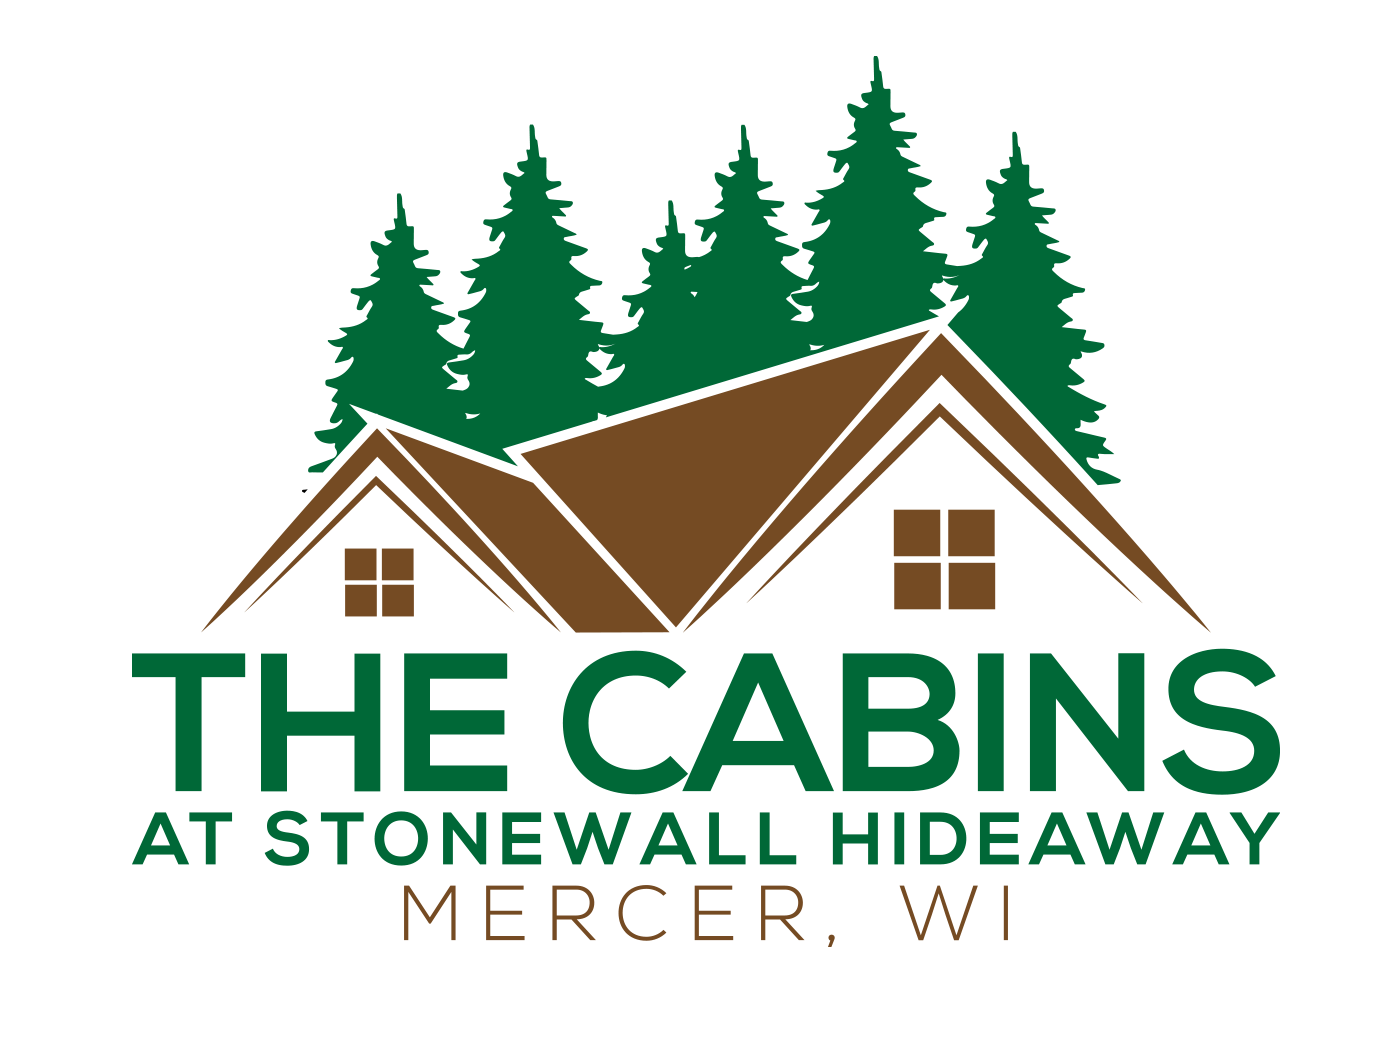 The Cabins at Stonewall Hideaway